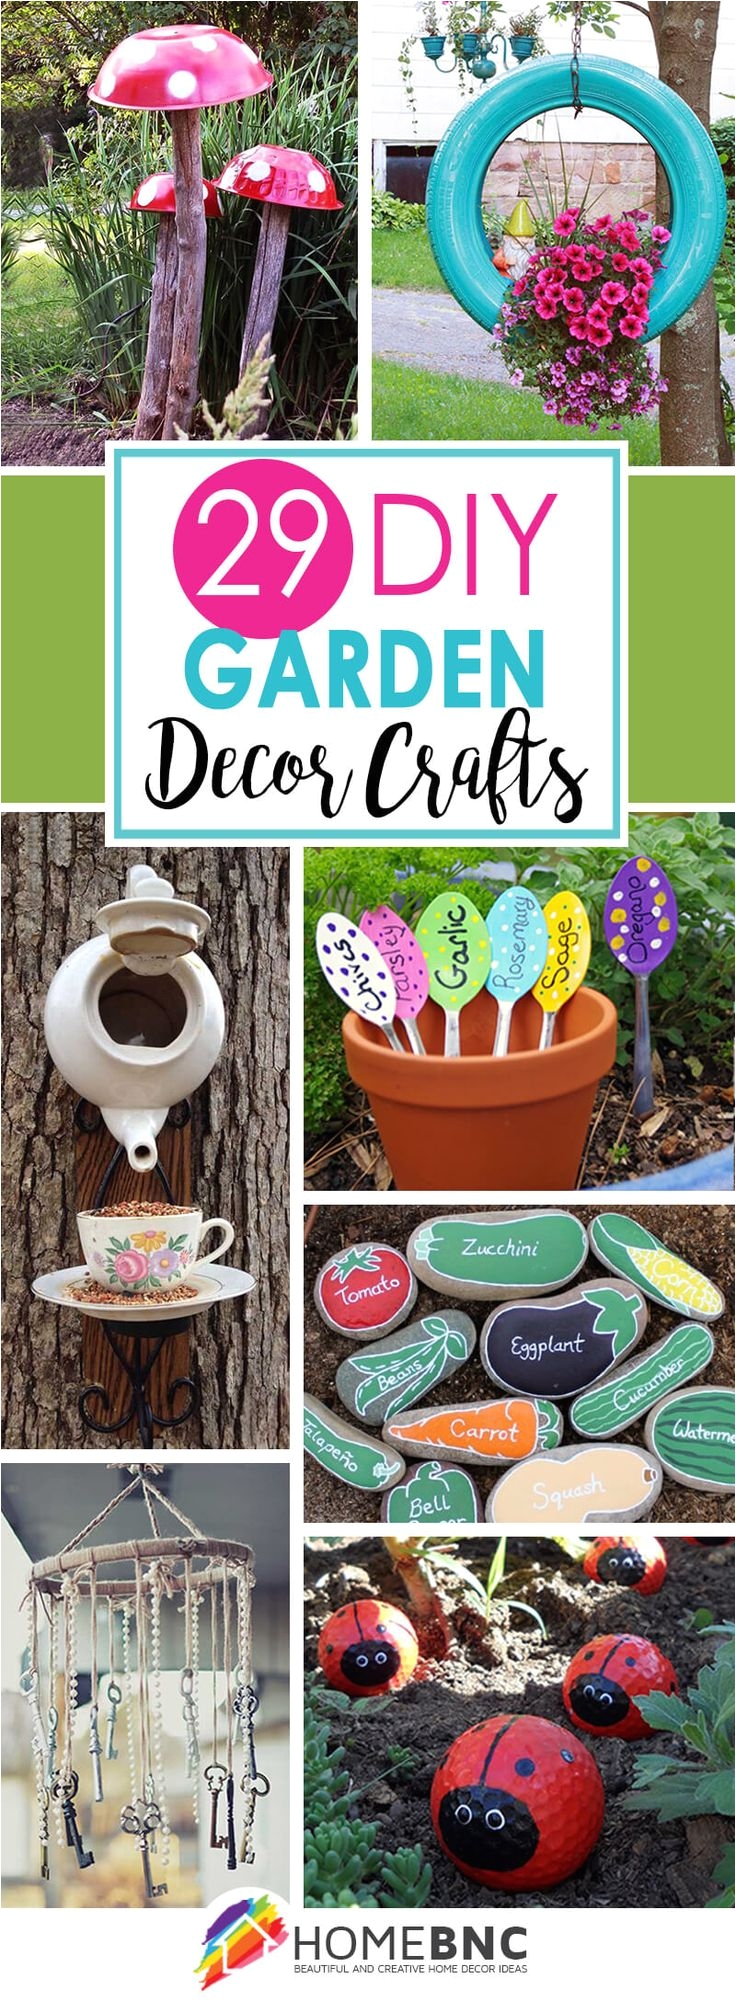 15 fabulous ways to add a bit of whimsy to your garden learning gardens and people